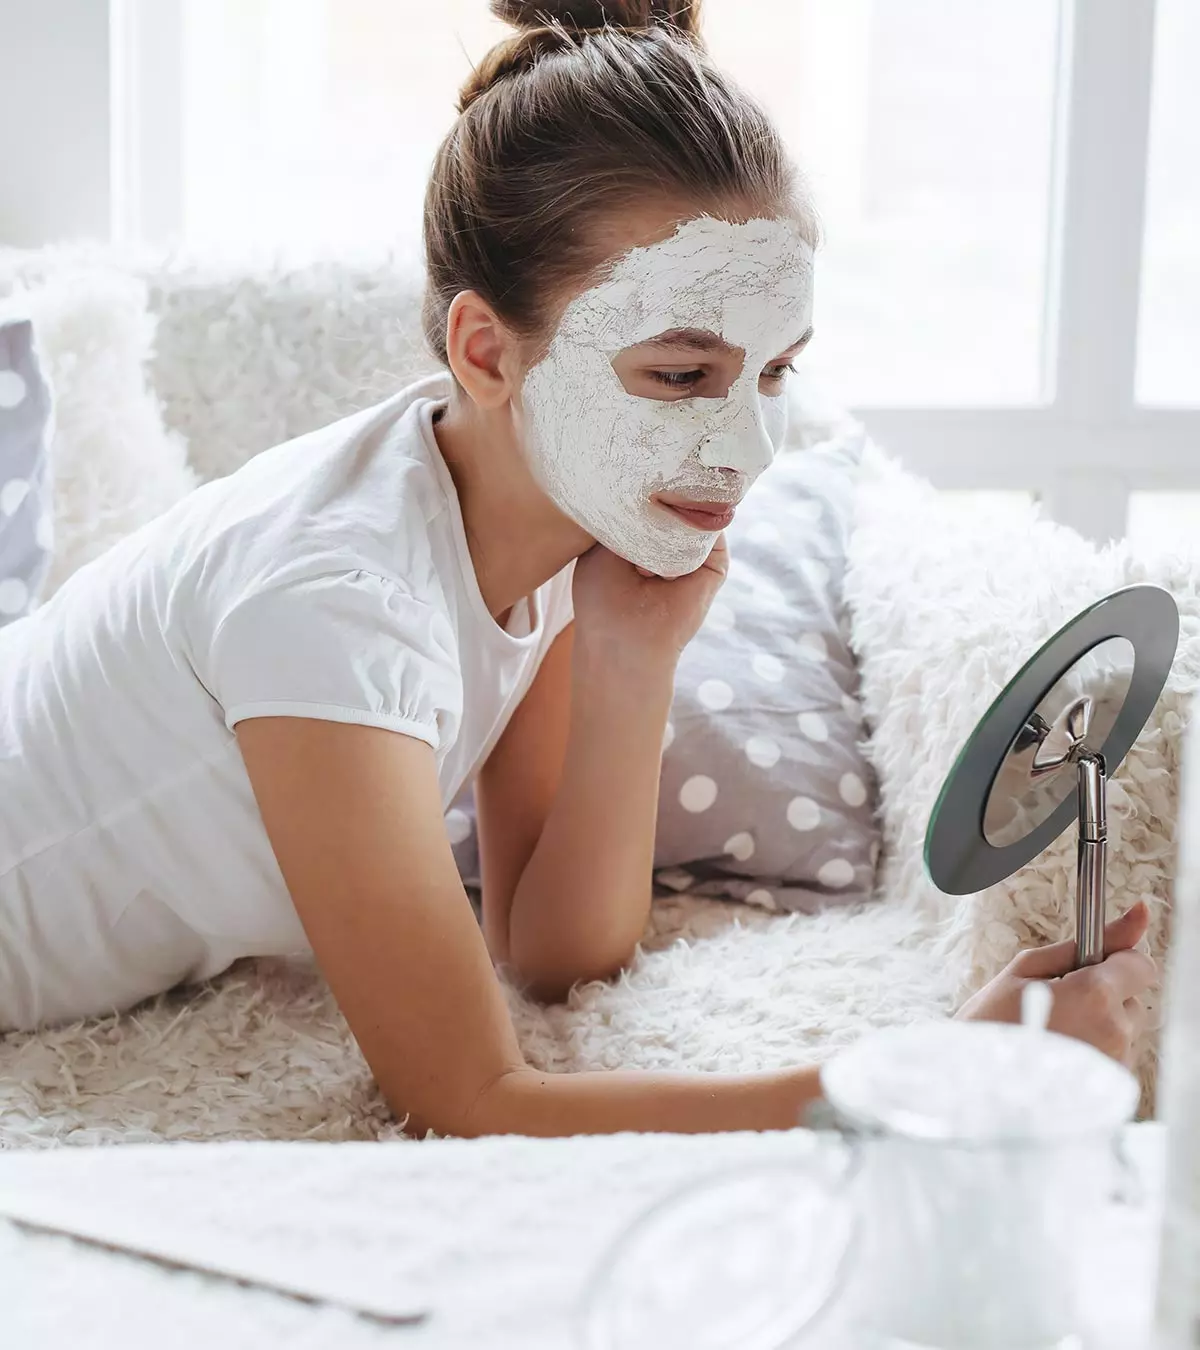 10 Essential Skin Care Tips For Teens